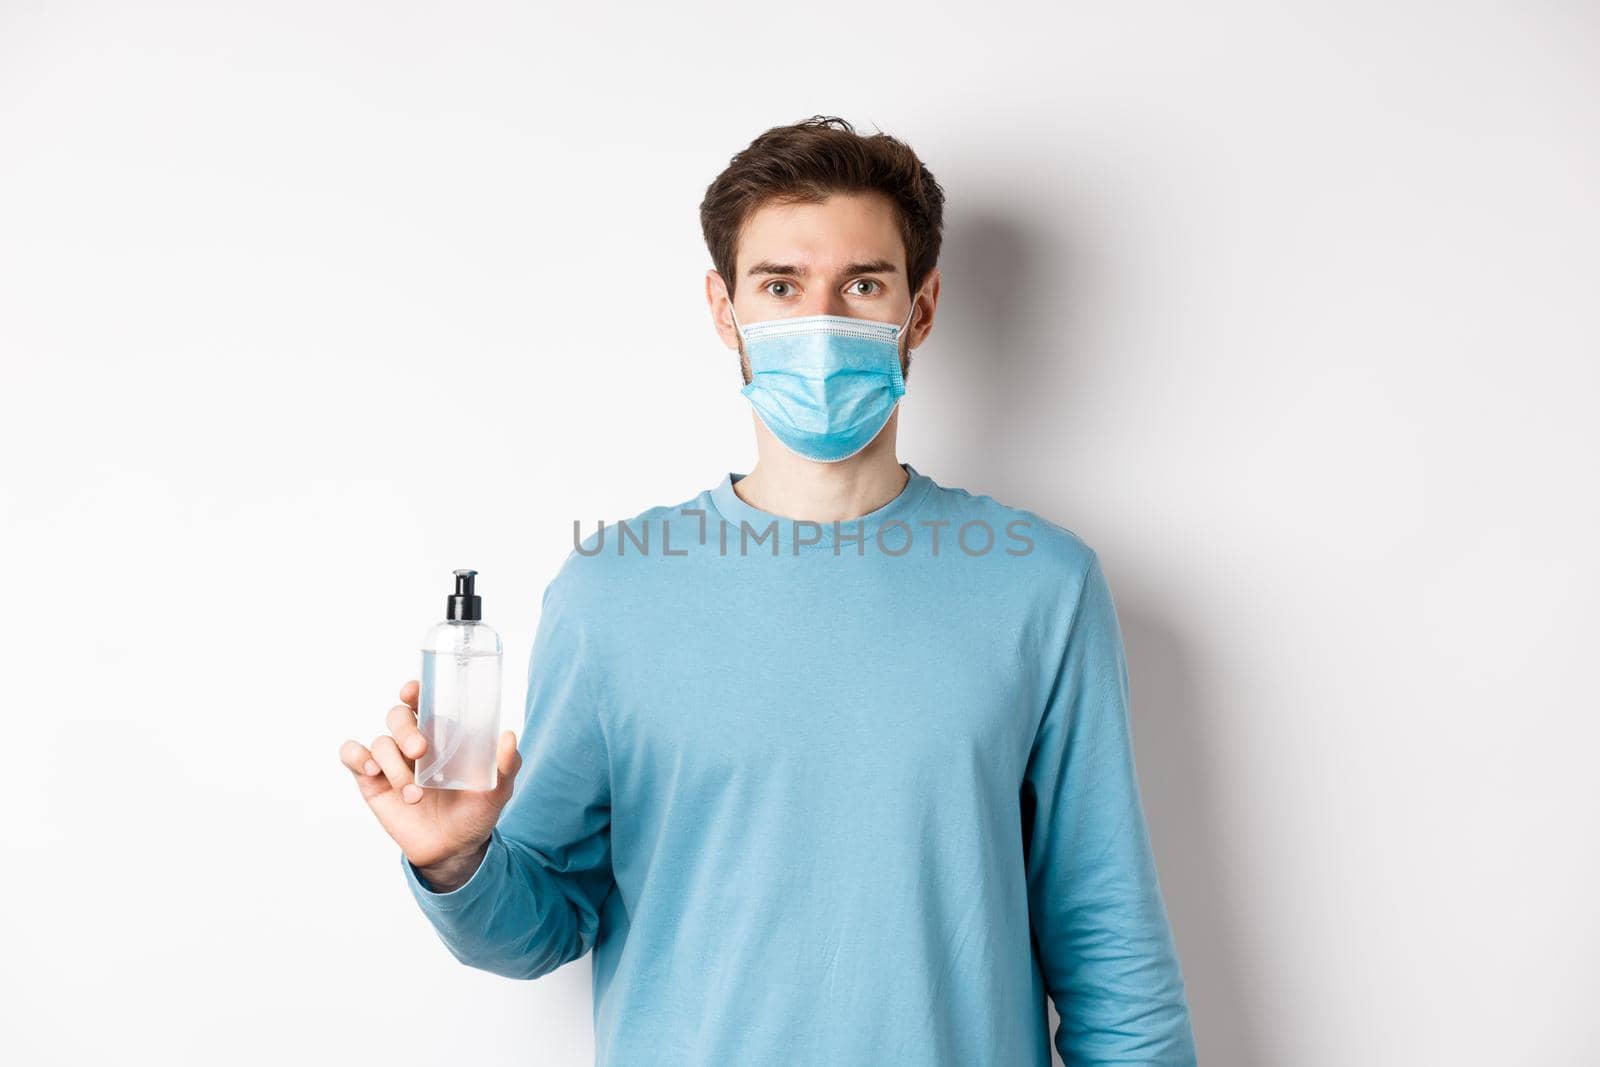 Covid-19, health and quarantine concept. Young caucasian man advice hand sanitizer, showing antiseptic and wearing medical mask, standing on white background.